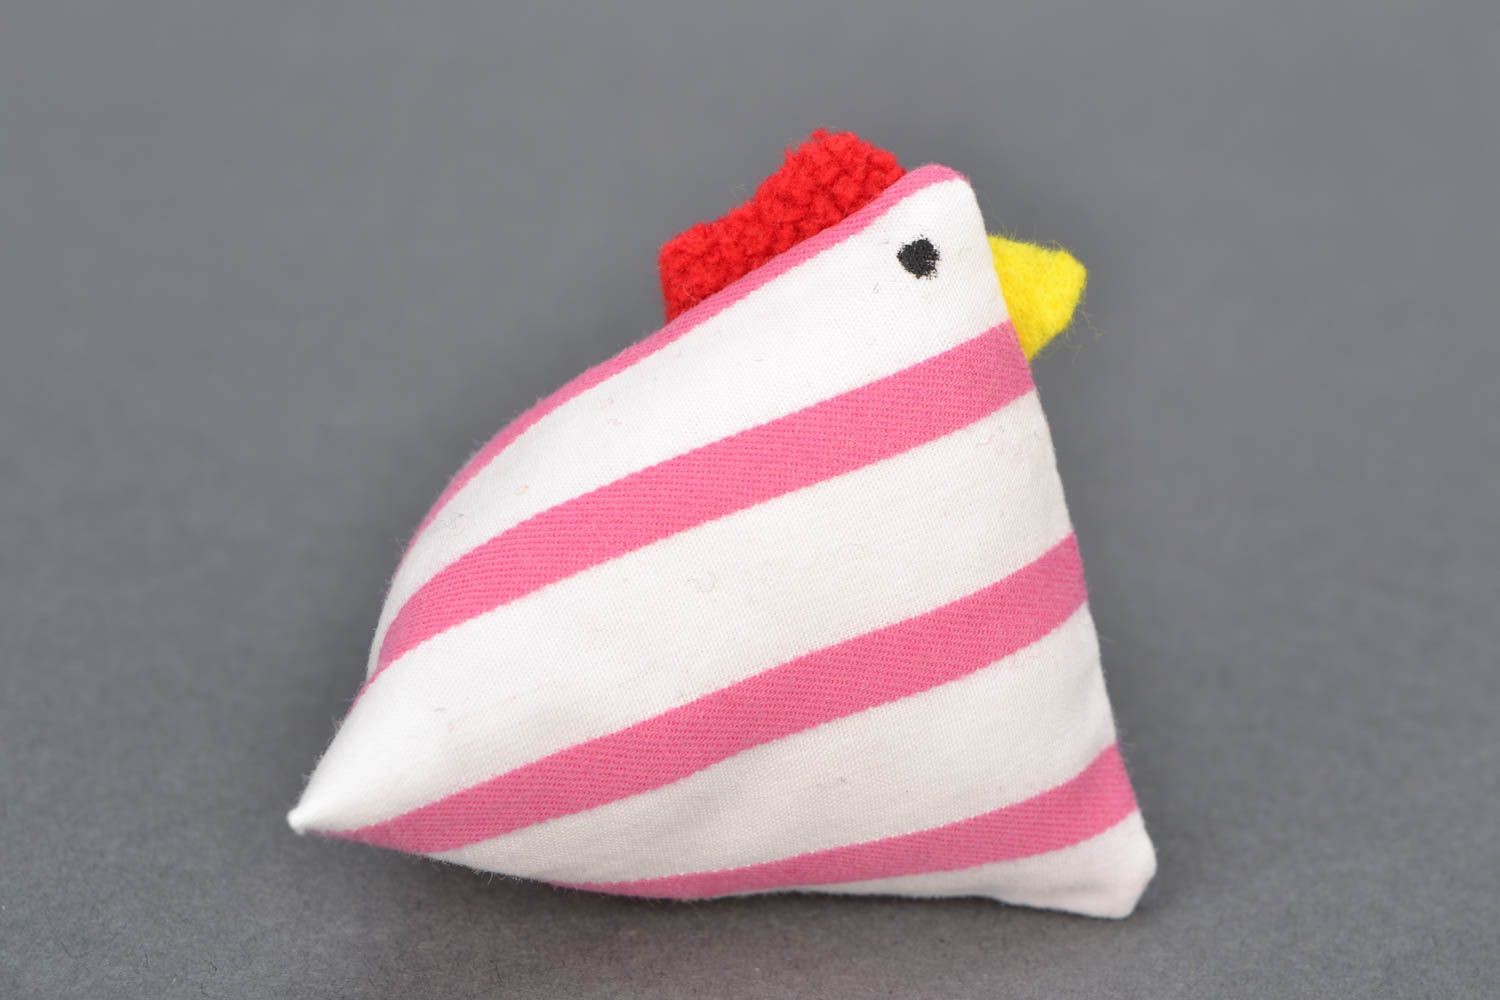 Fabric needle bed in the shape of chicken photo 1